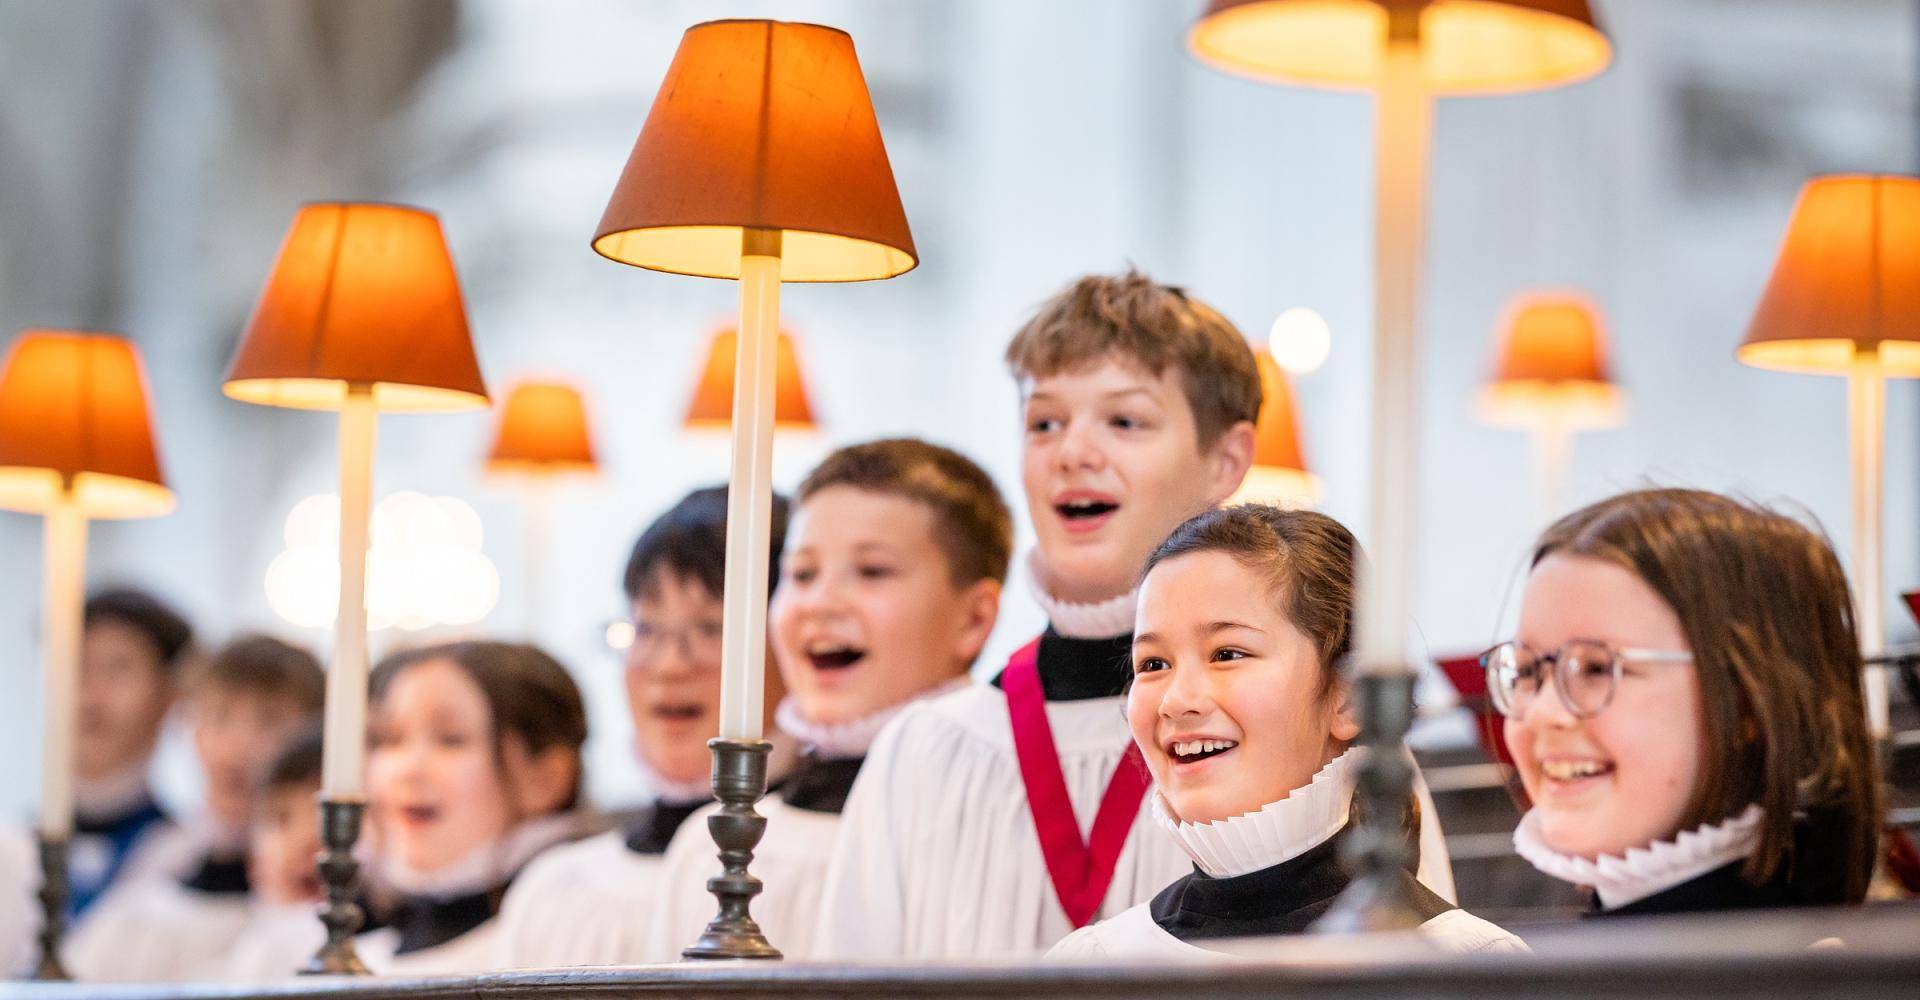 Boy and girl choristers singing in the quire